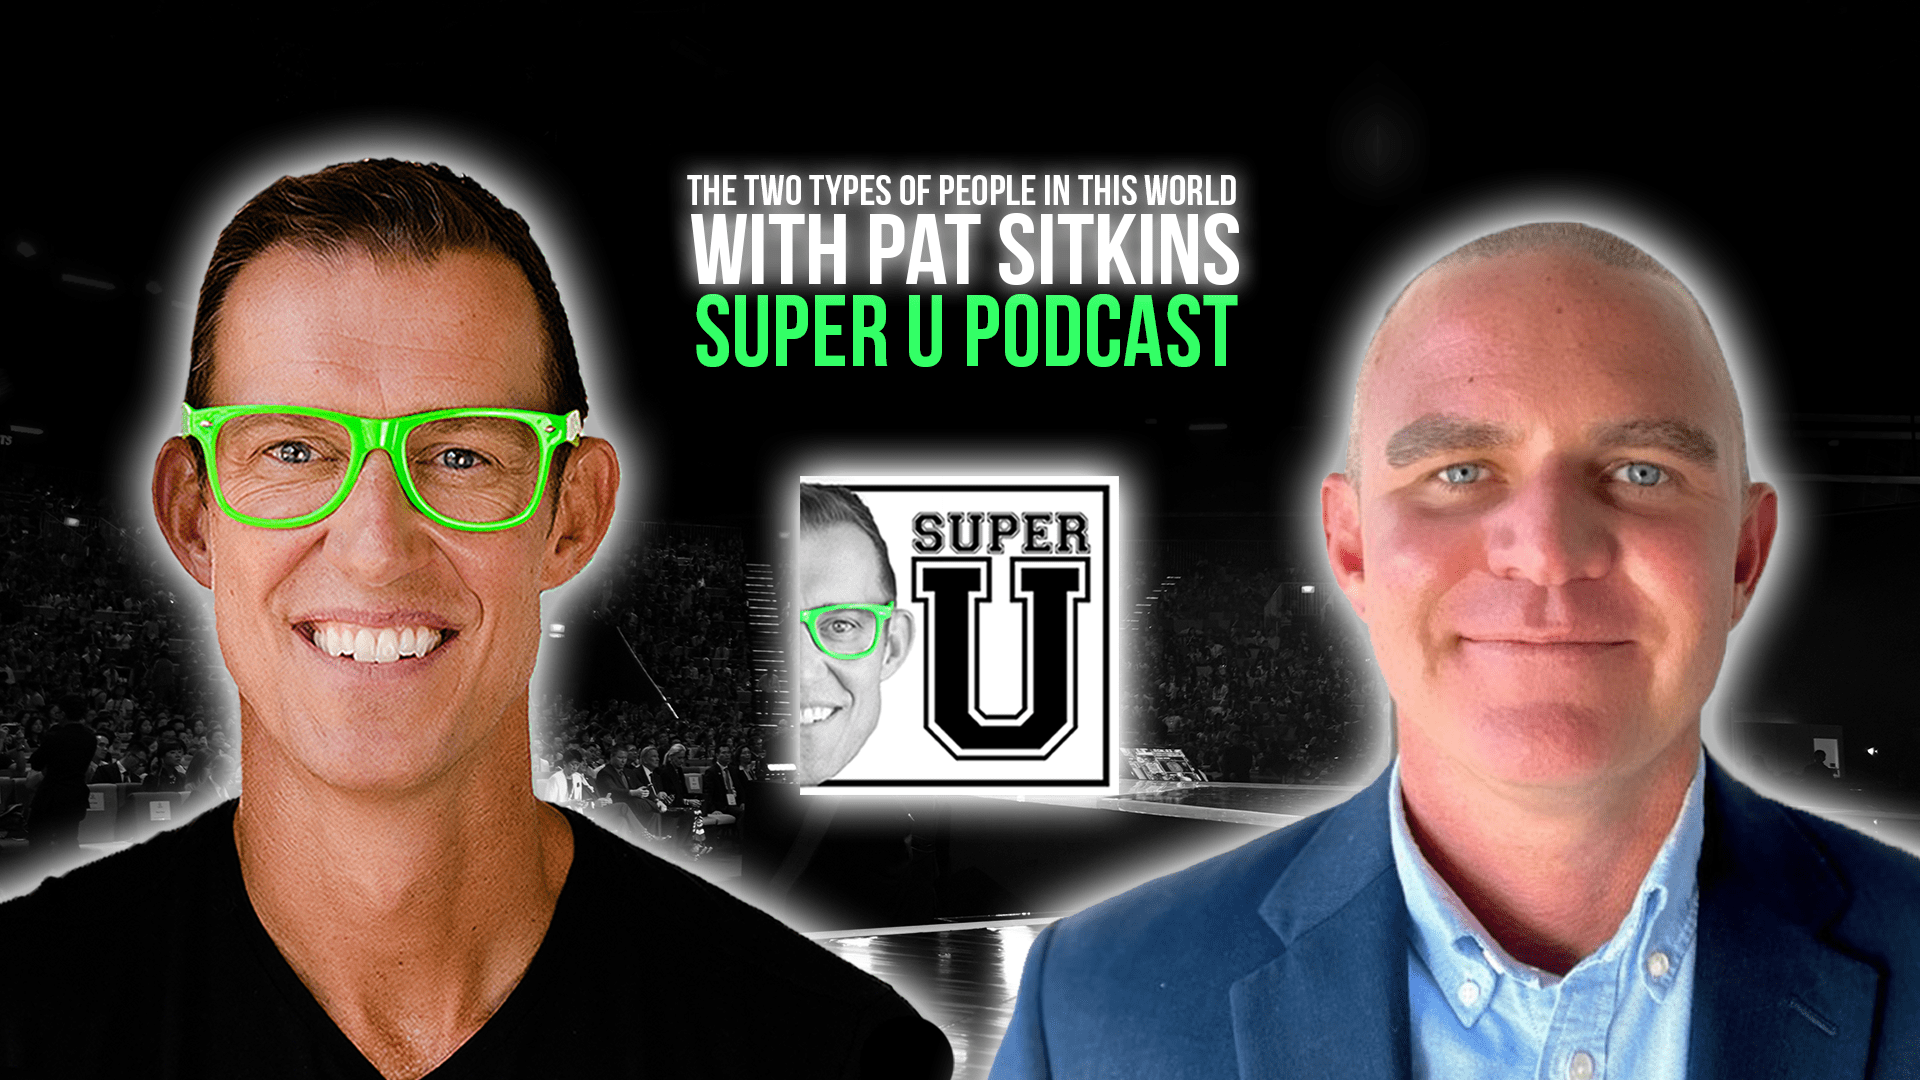 super-u-podcast-the-two-types-of-people-in-this-world-with-pat-sitkins